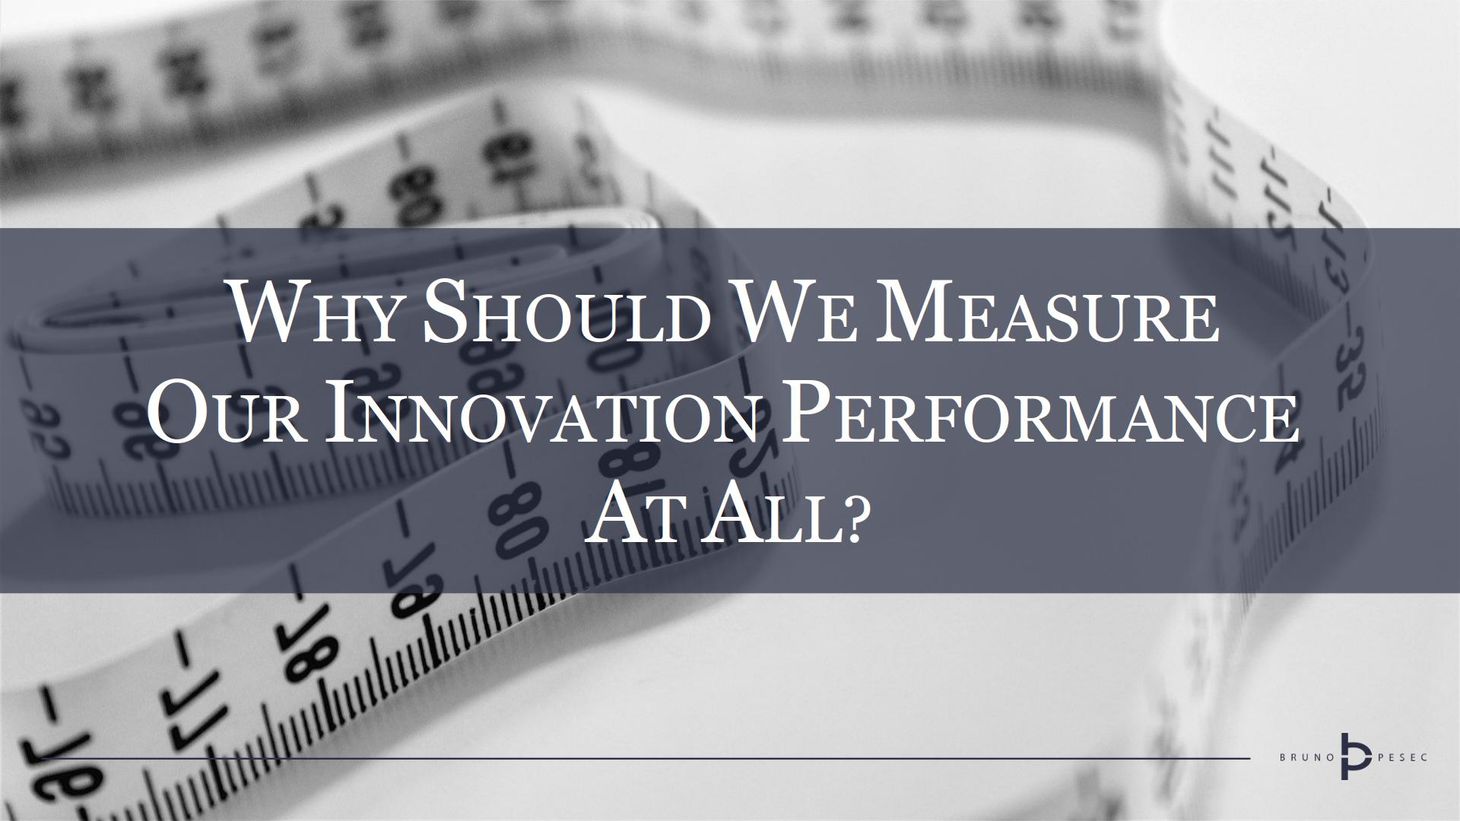 Why should we measure our innovation performance at all?